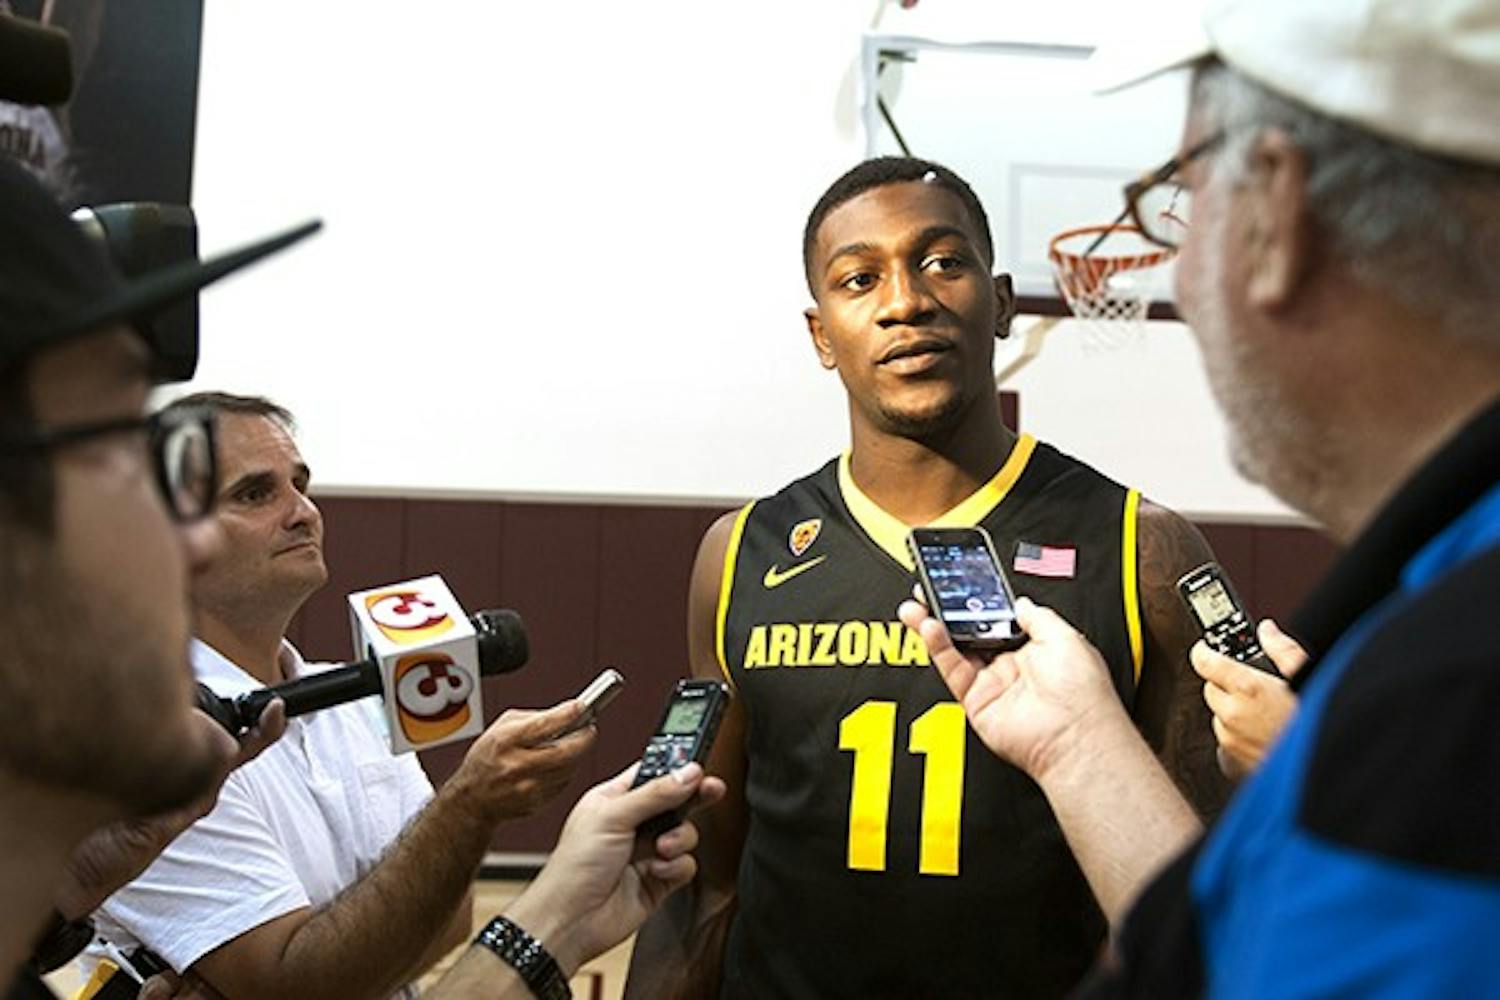 Sophomore Forward Savon Goodman talks about his excitement for the upcoming season, ASU’s first game is on Nov. 14 against Chicago State. (Photo by Mario Mendez)